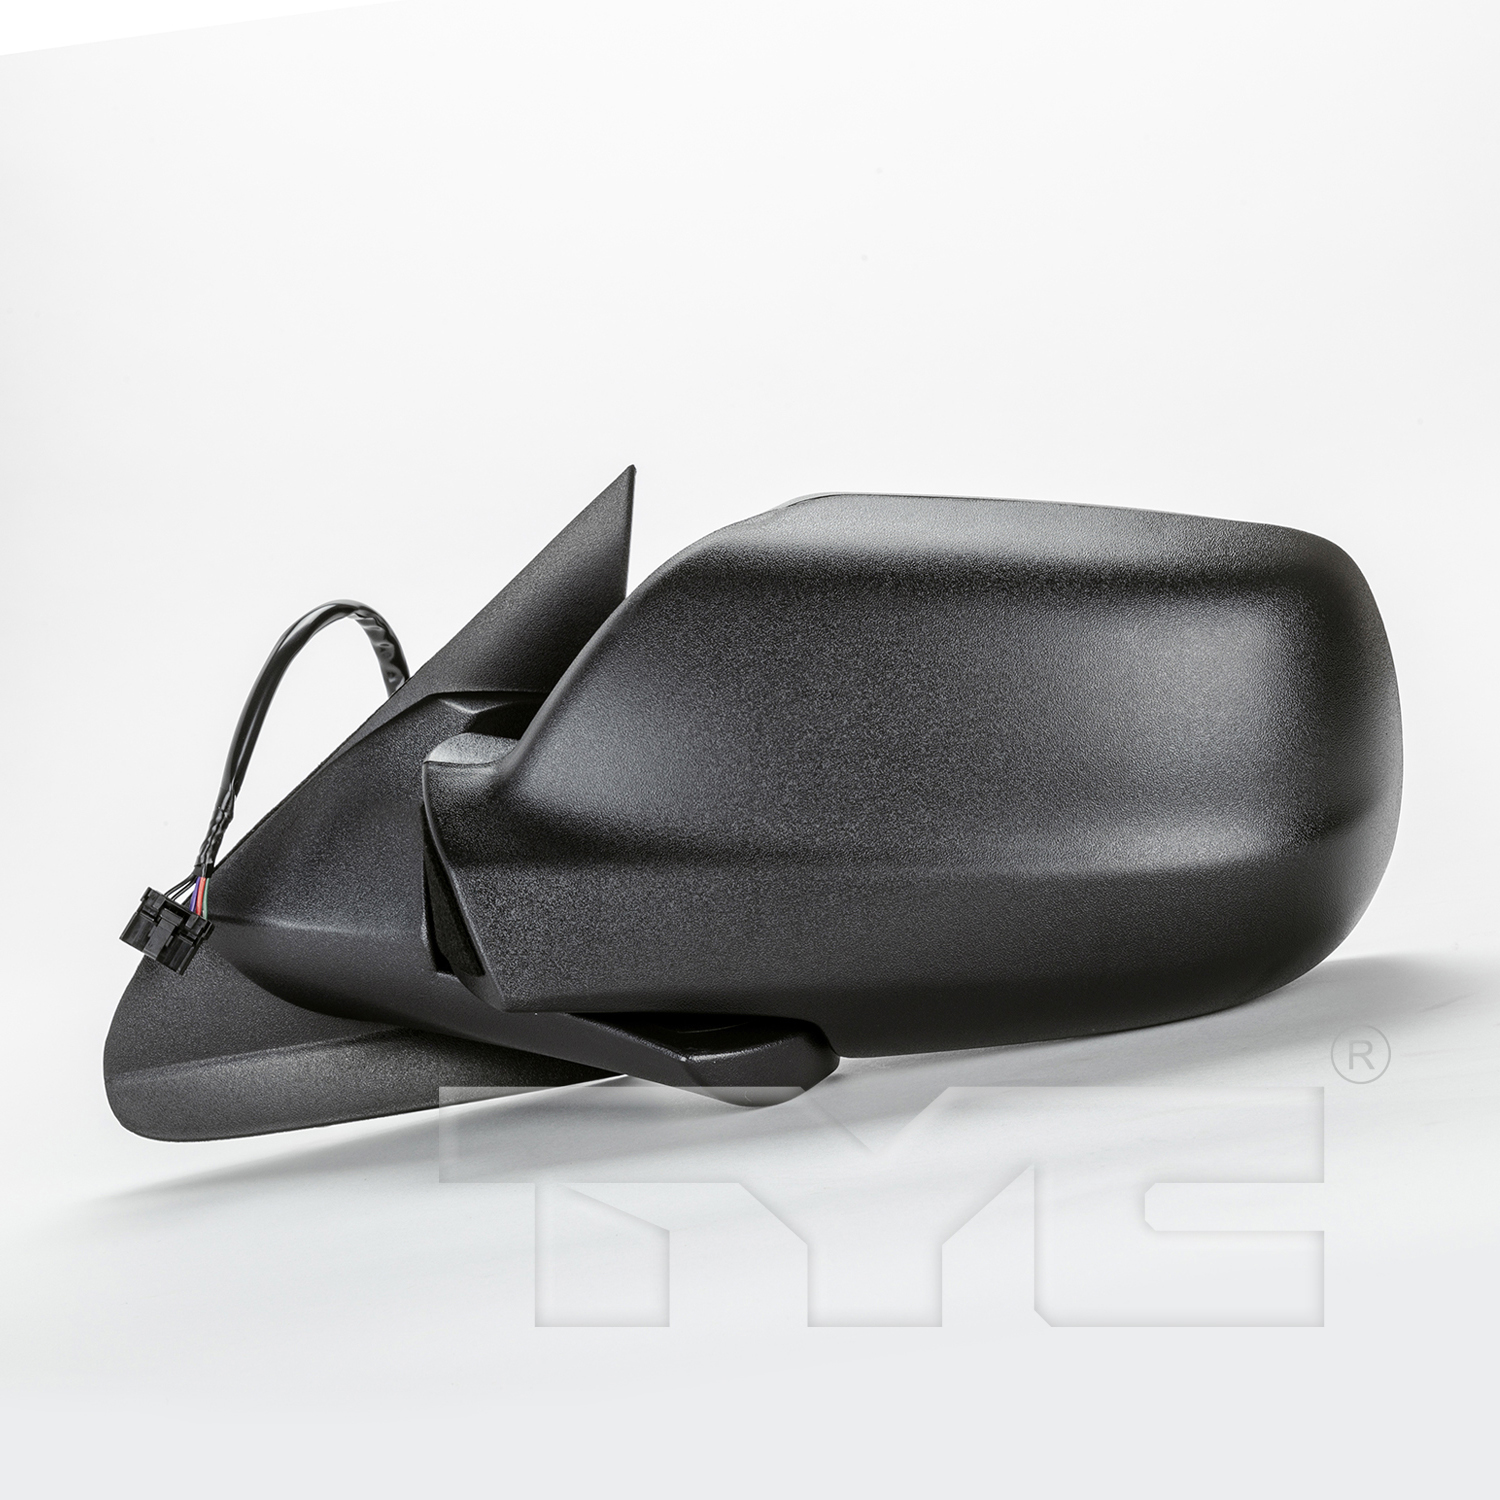 Aftermarket MIRRORS for JEEP - GRAND CHEROKEE, GRAND CHEROKEE,05-10,LT Mirror outside rear view